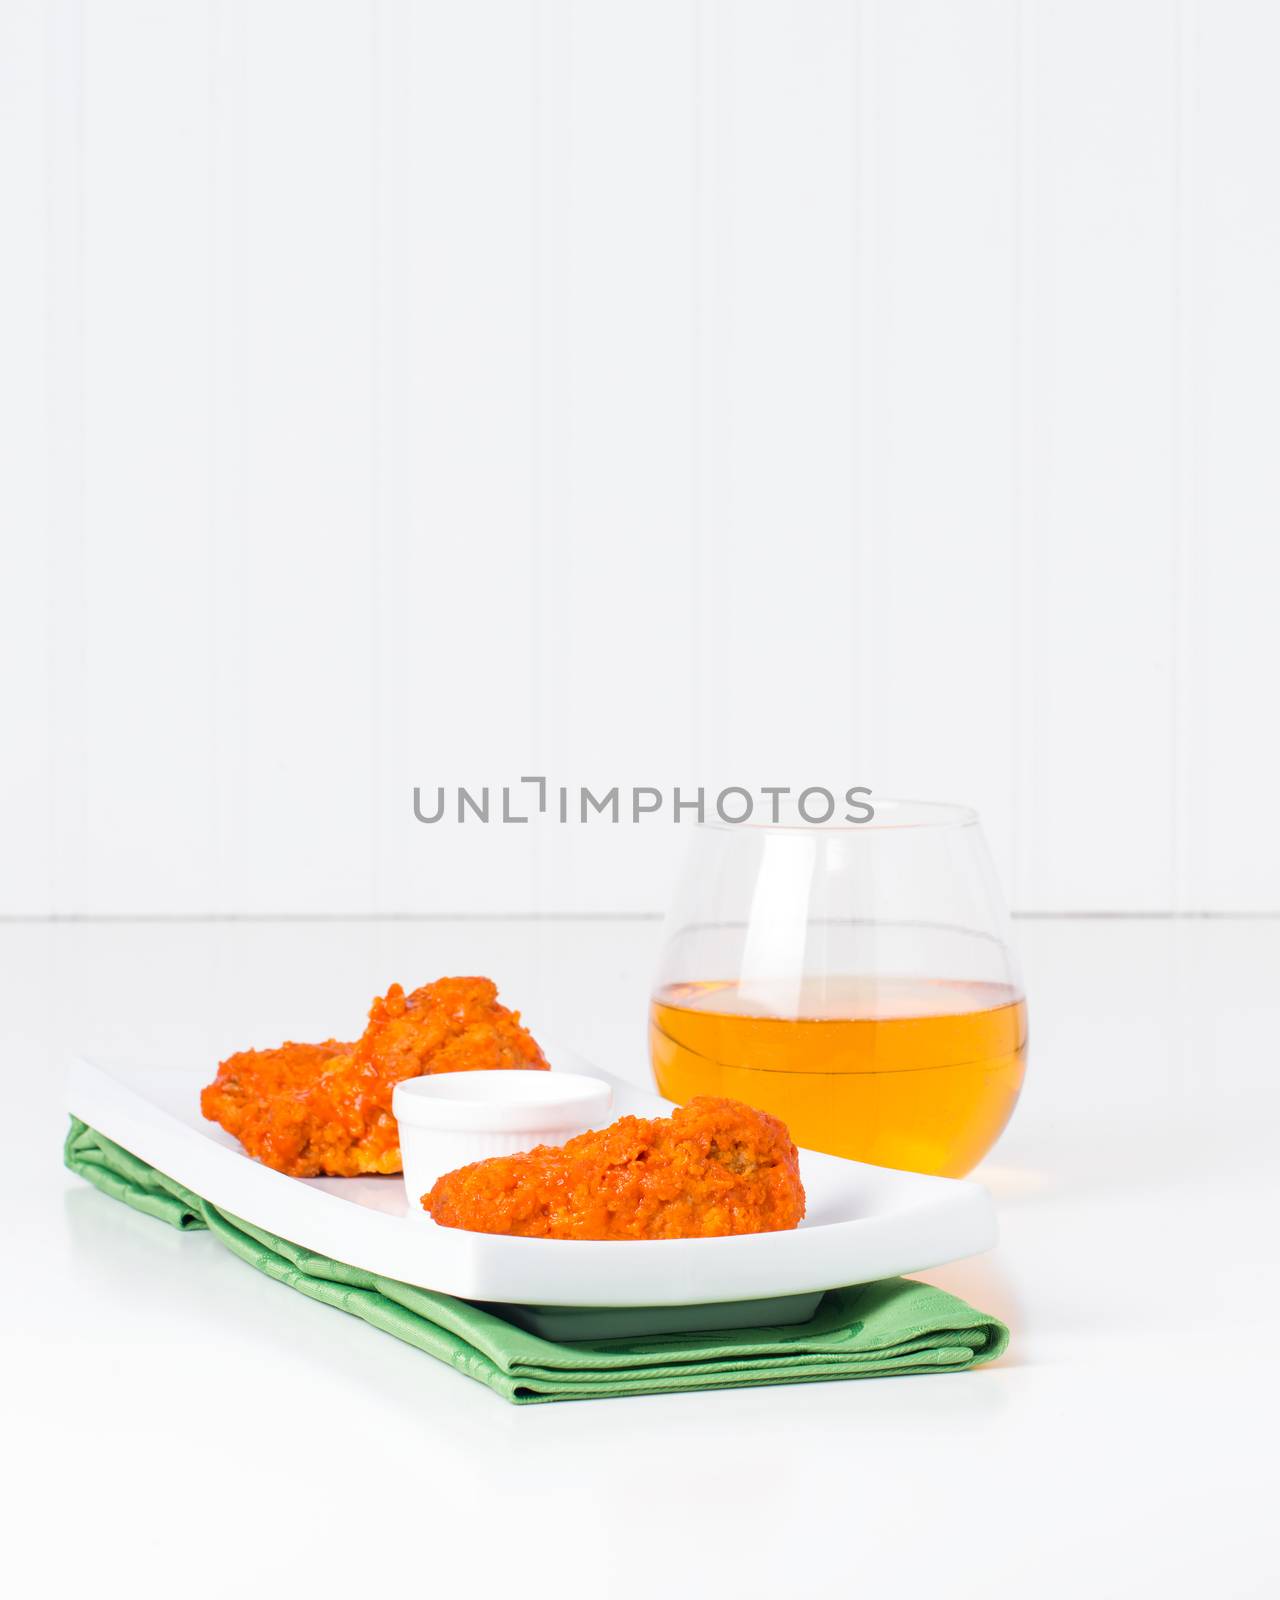 Buffalo chicken wings on a more elegant place setting.